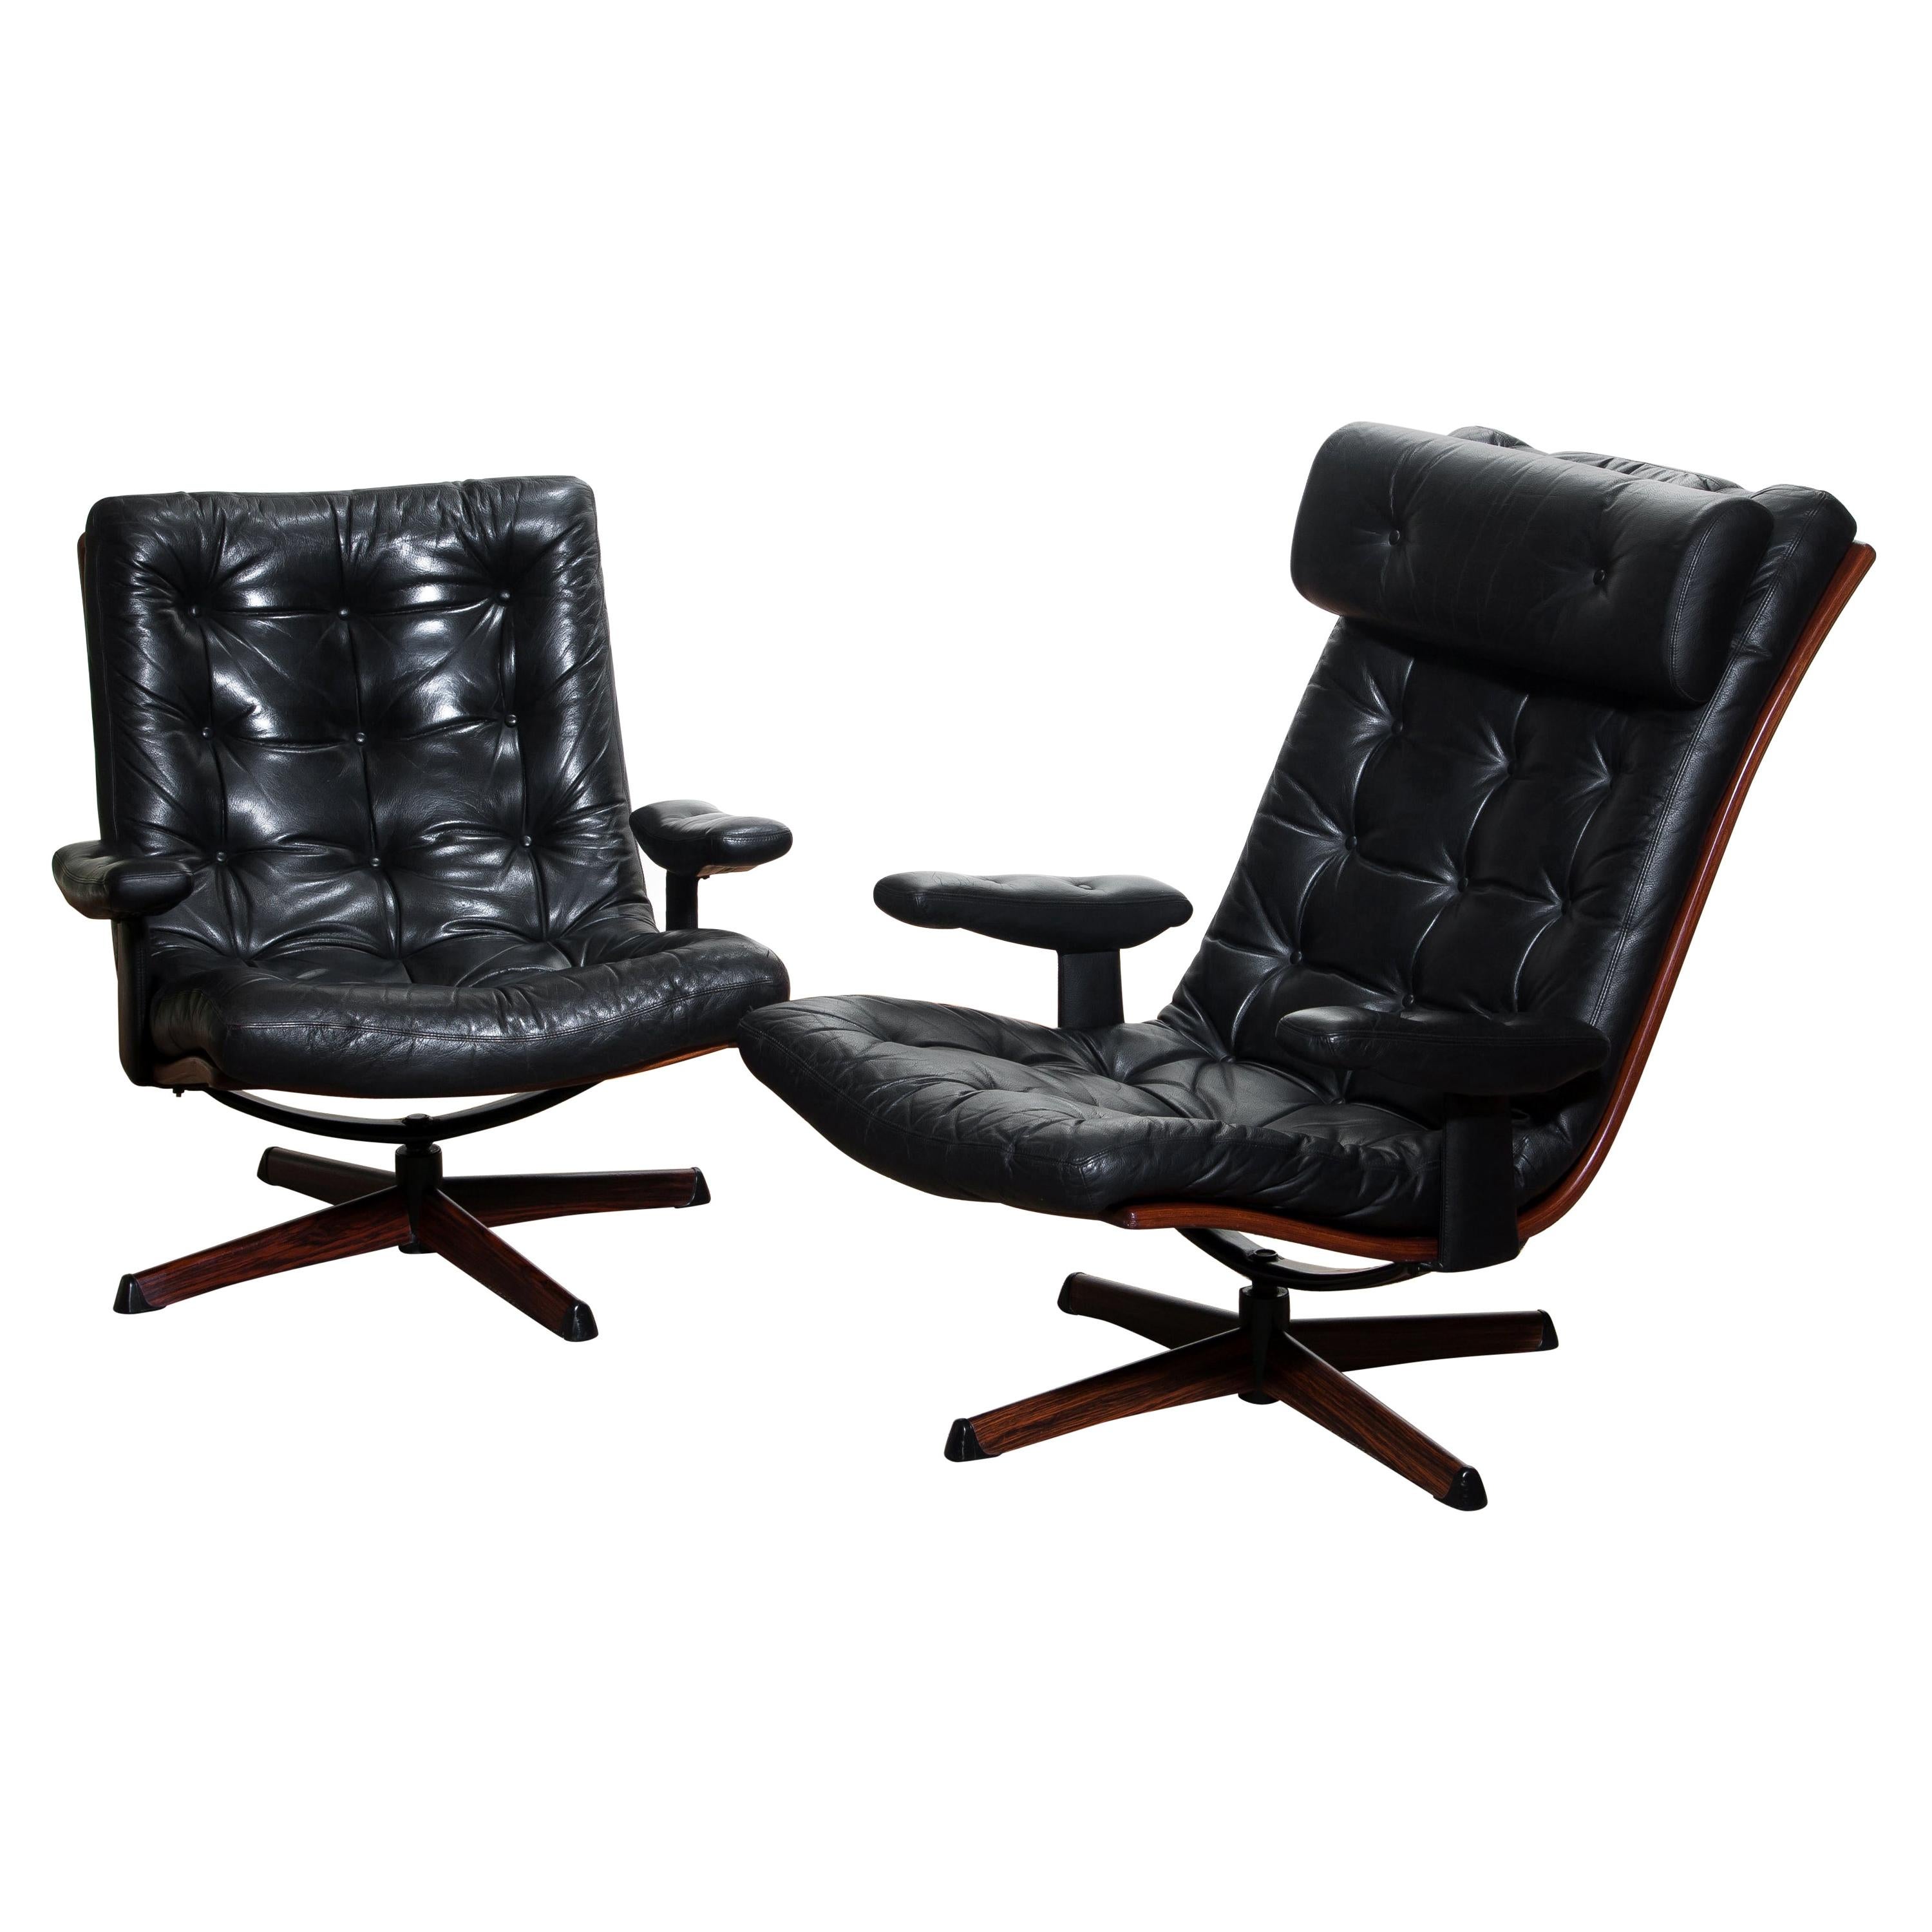 Beautiful set of two extremely comfortable and matching swivel chairs by Göte Design Nässjö, Sweden, 1960
The metal swivel stands are covered with an Jacaranda print.
The chairs are upholstered with black sturdy leather and all in perfect